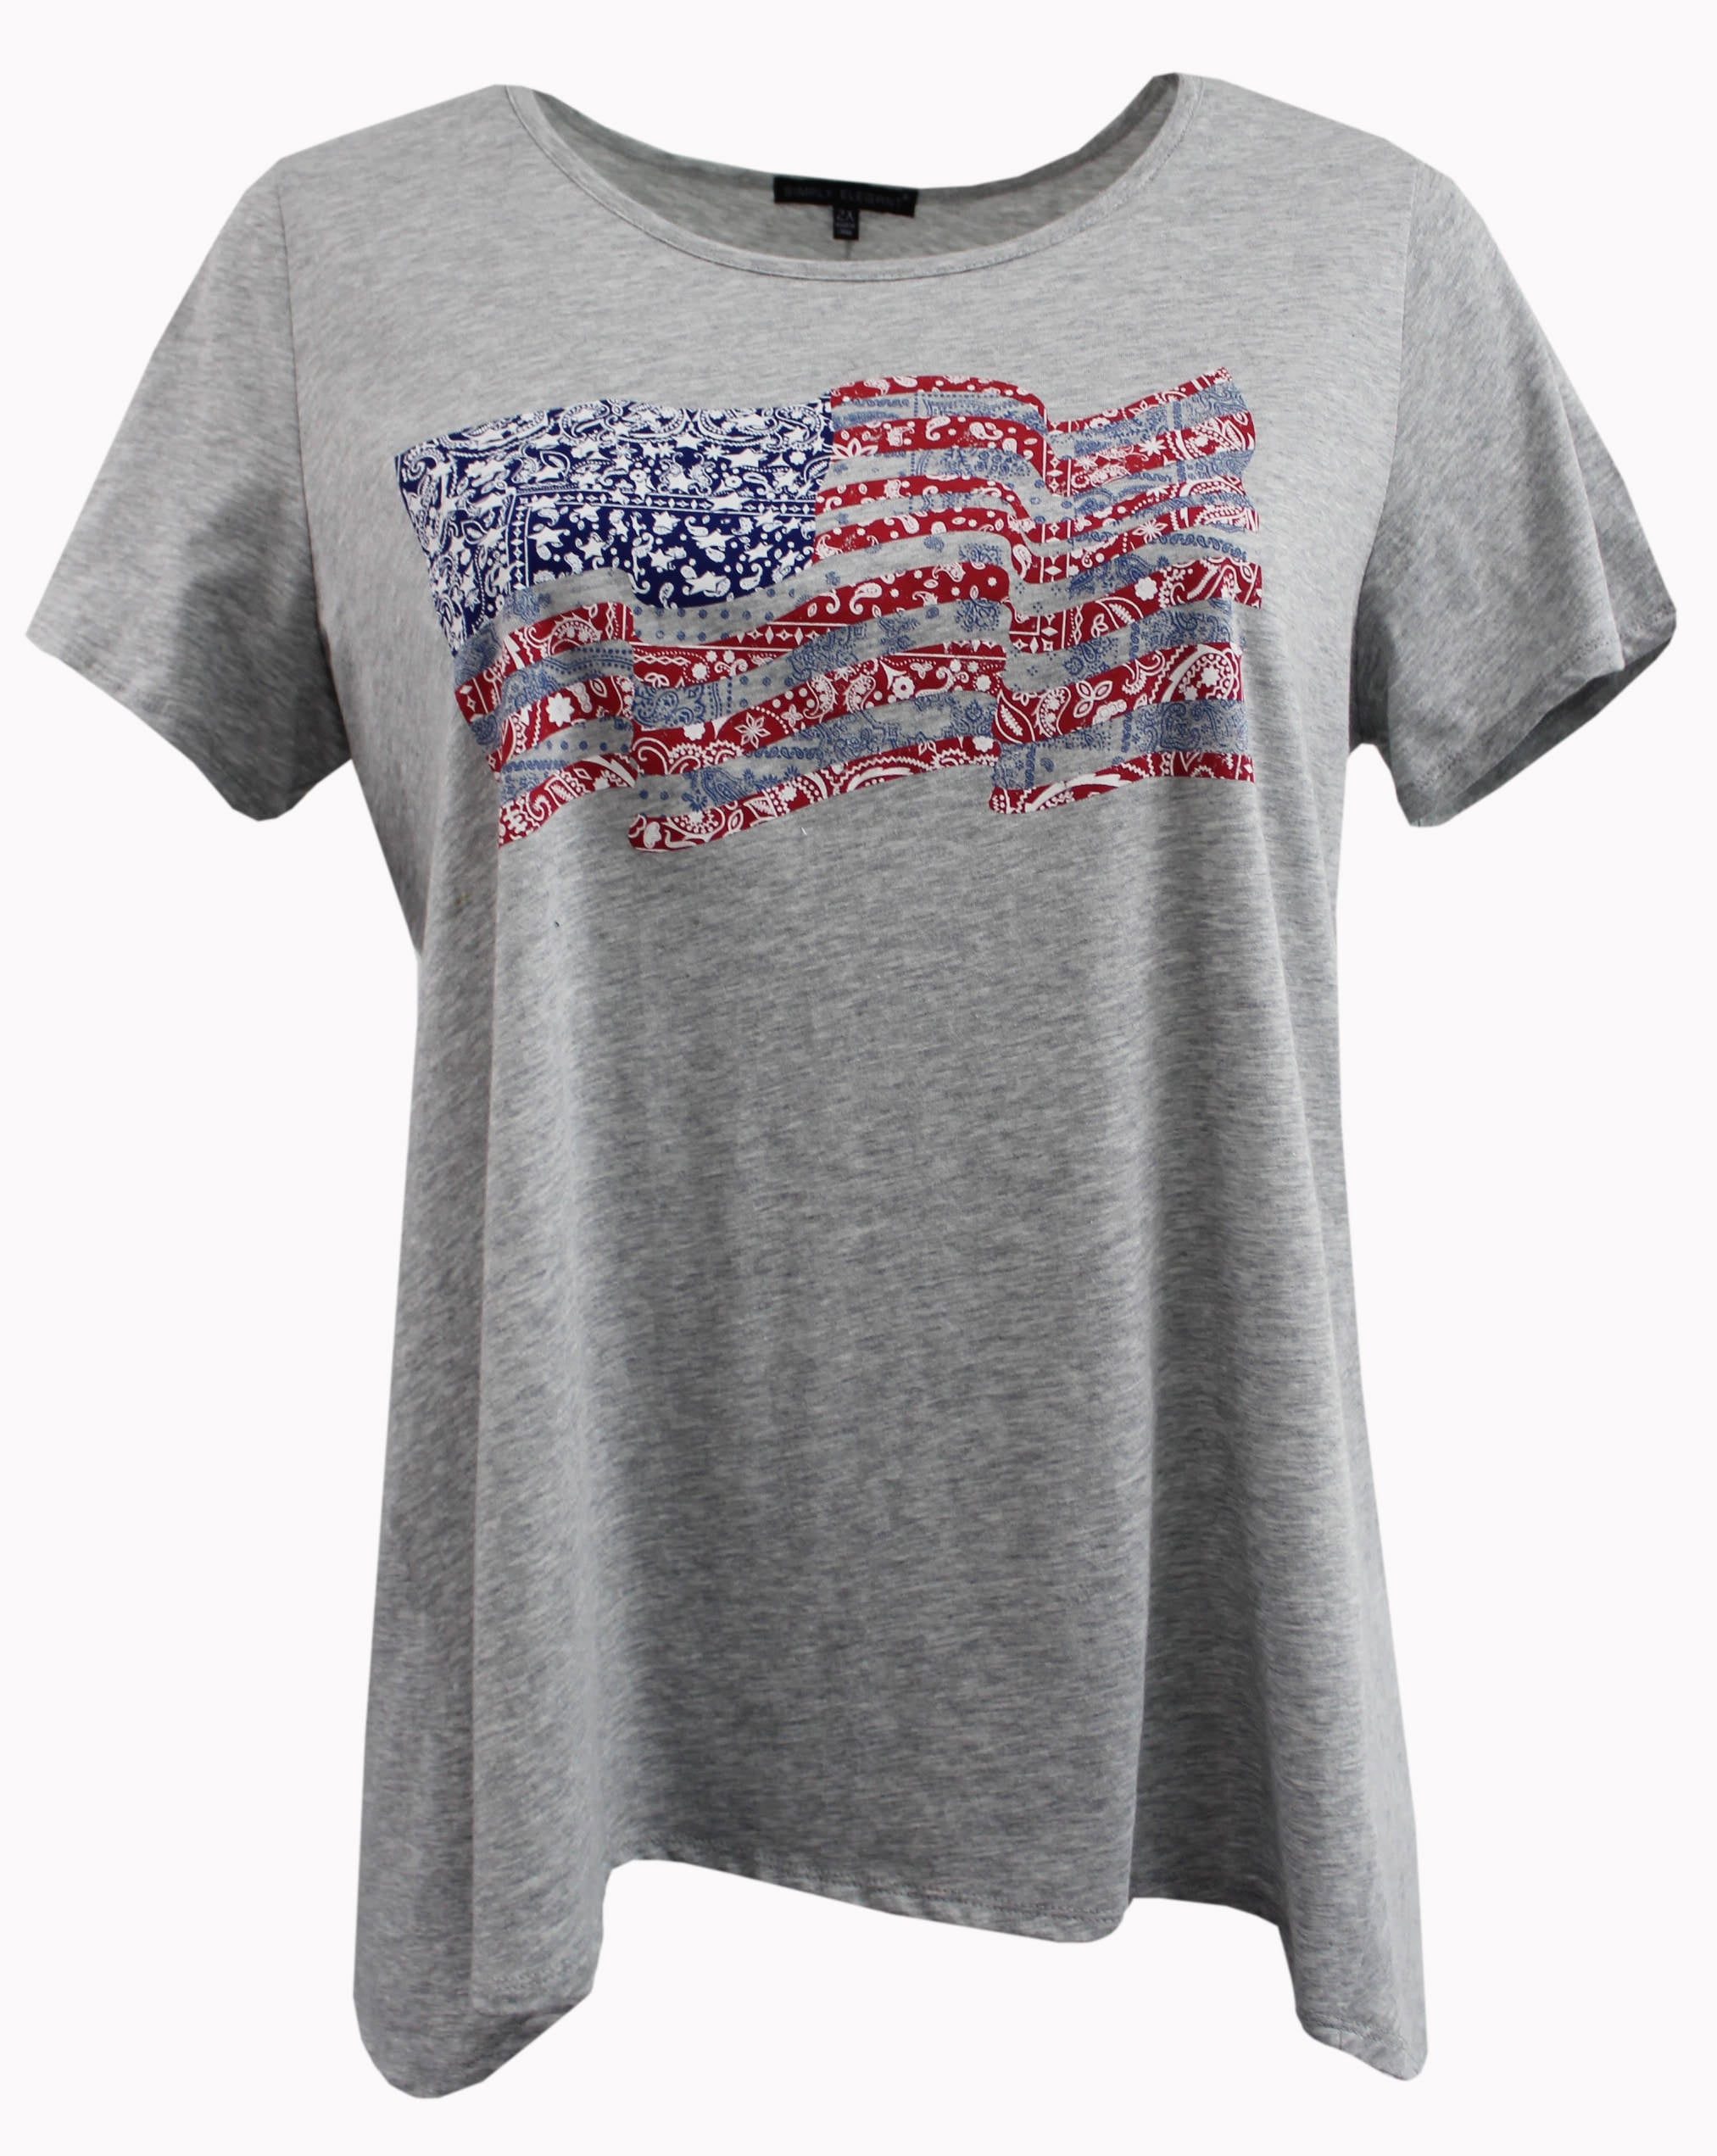 Woman Short Sleeve Round Neck American Flag Blouse T Shirt Knit Top Tee  Grey 3X (17020-5)